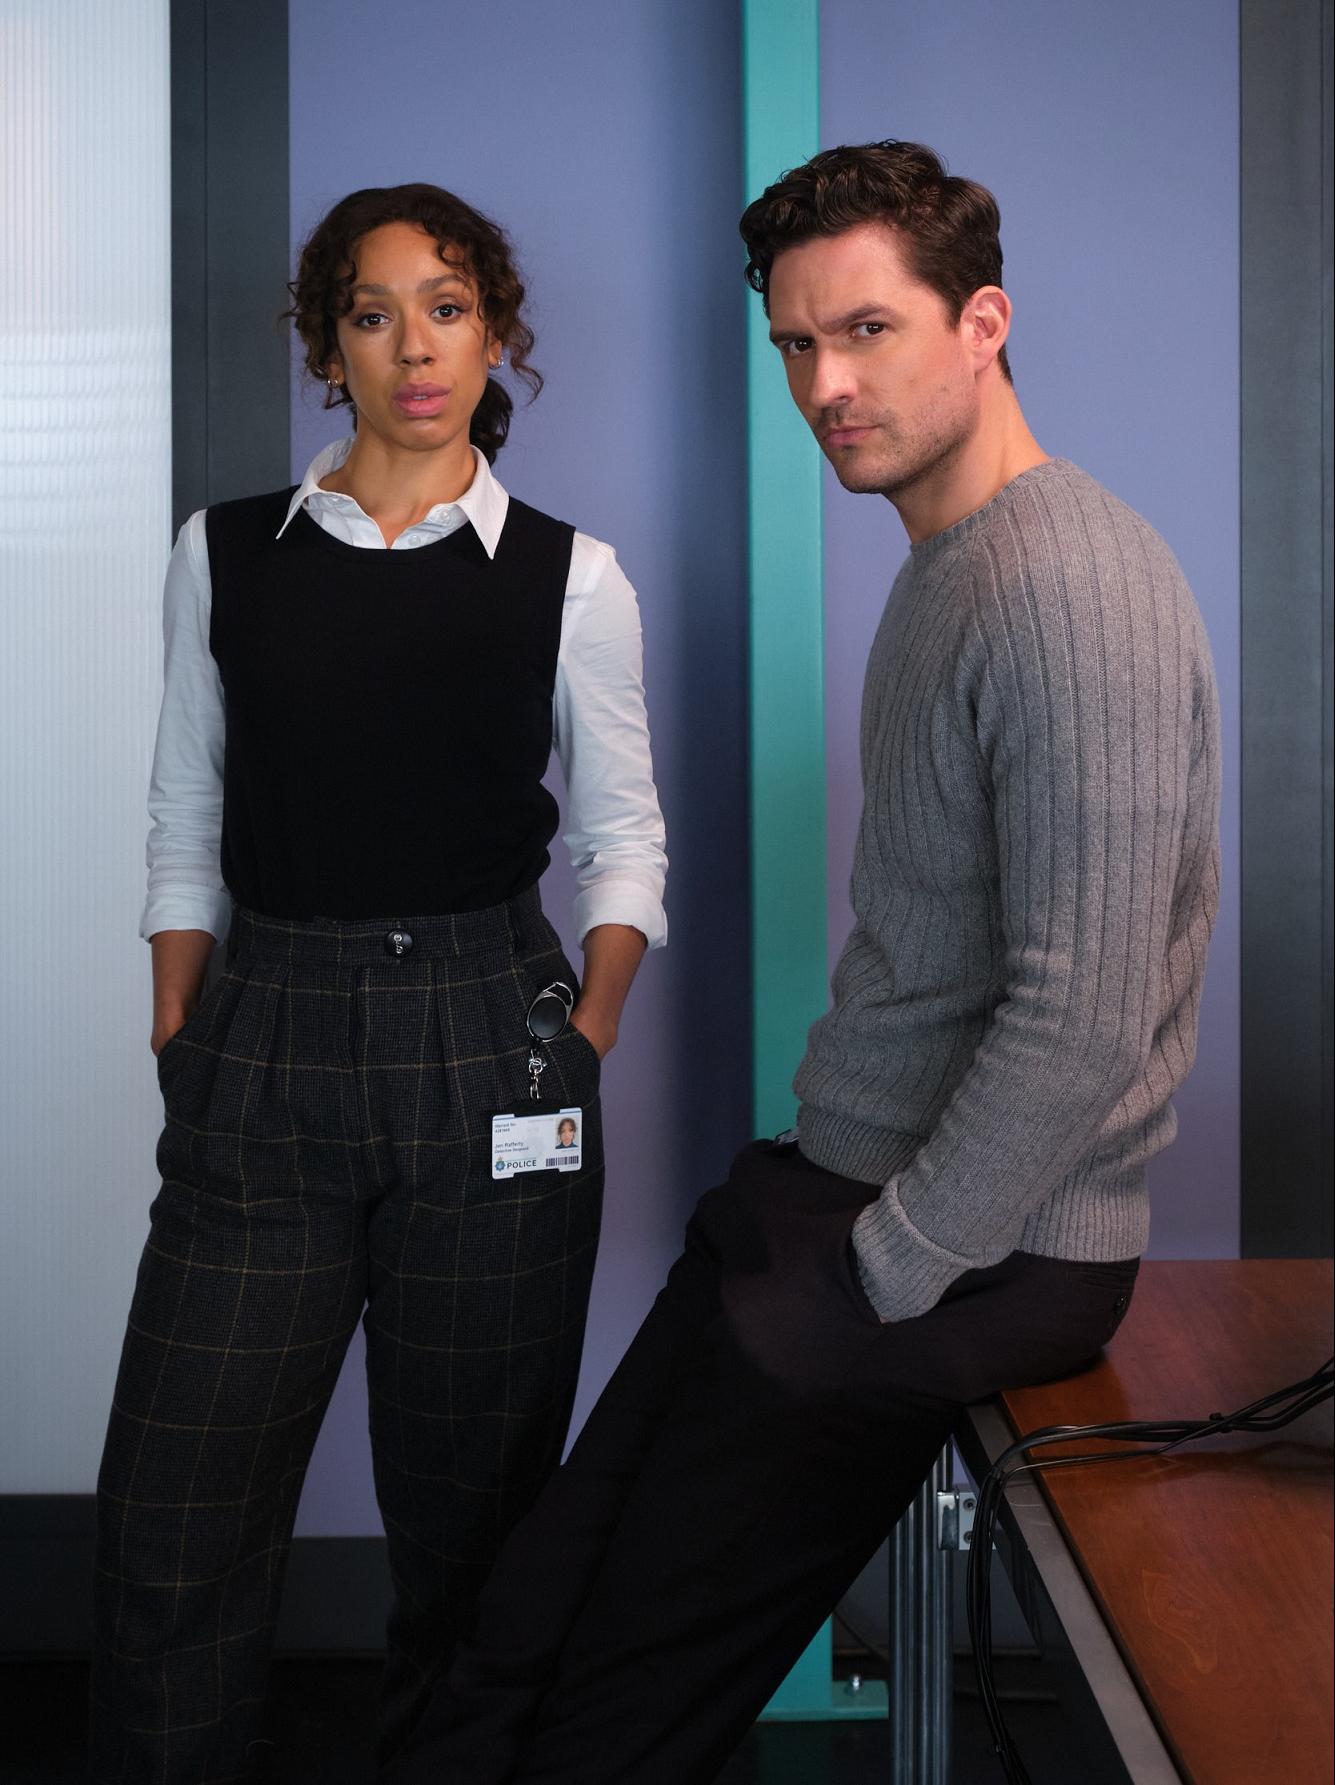 First look - Pearl Mackie & Ben Aldridge in The Long Call - image courtesy ITV